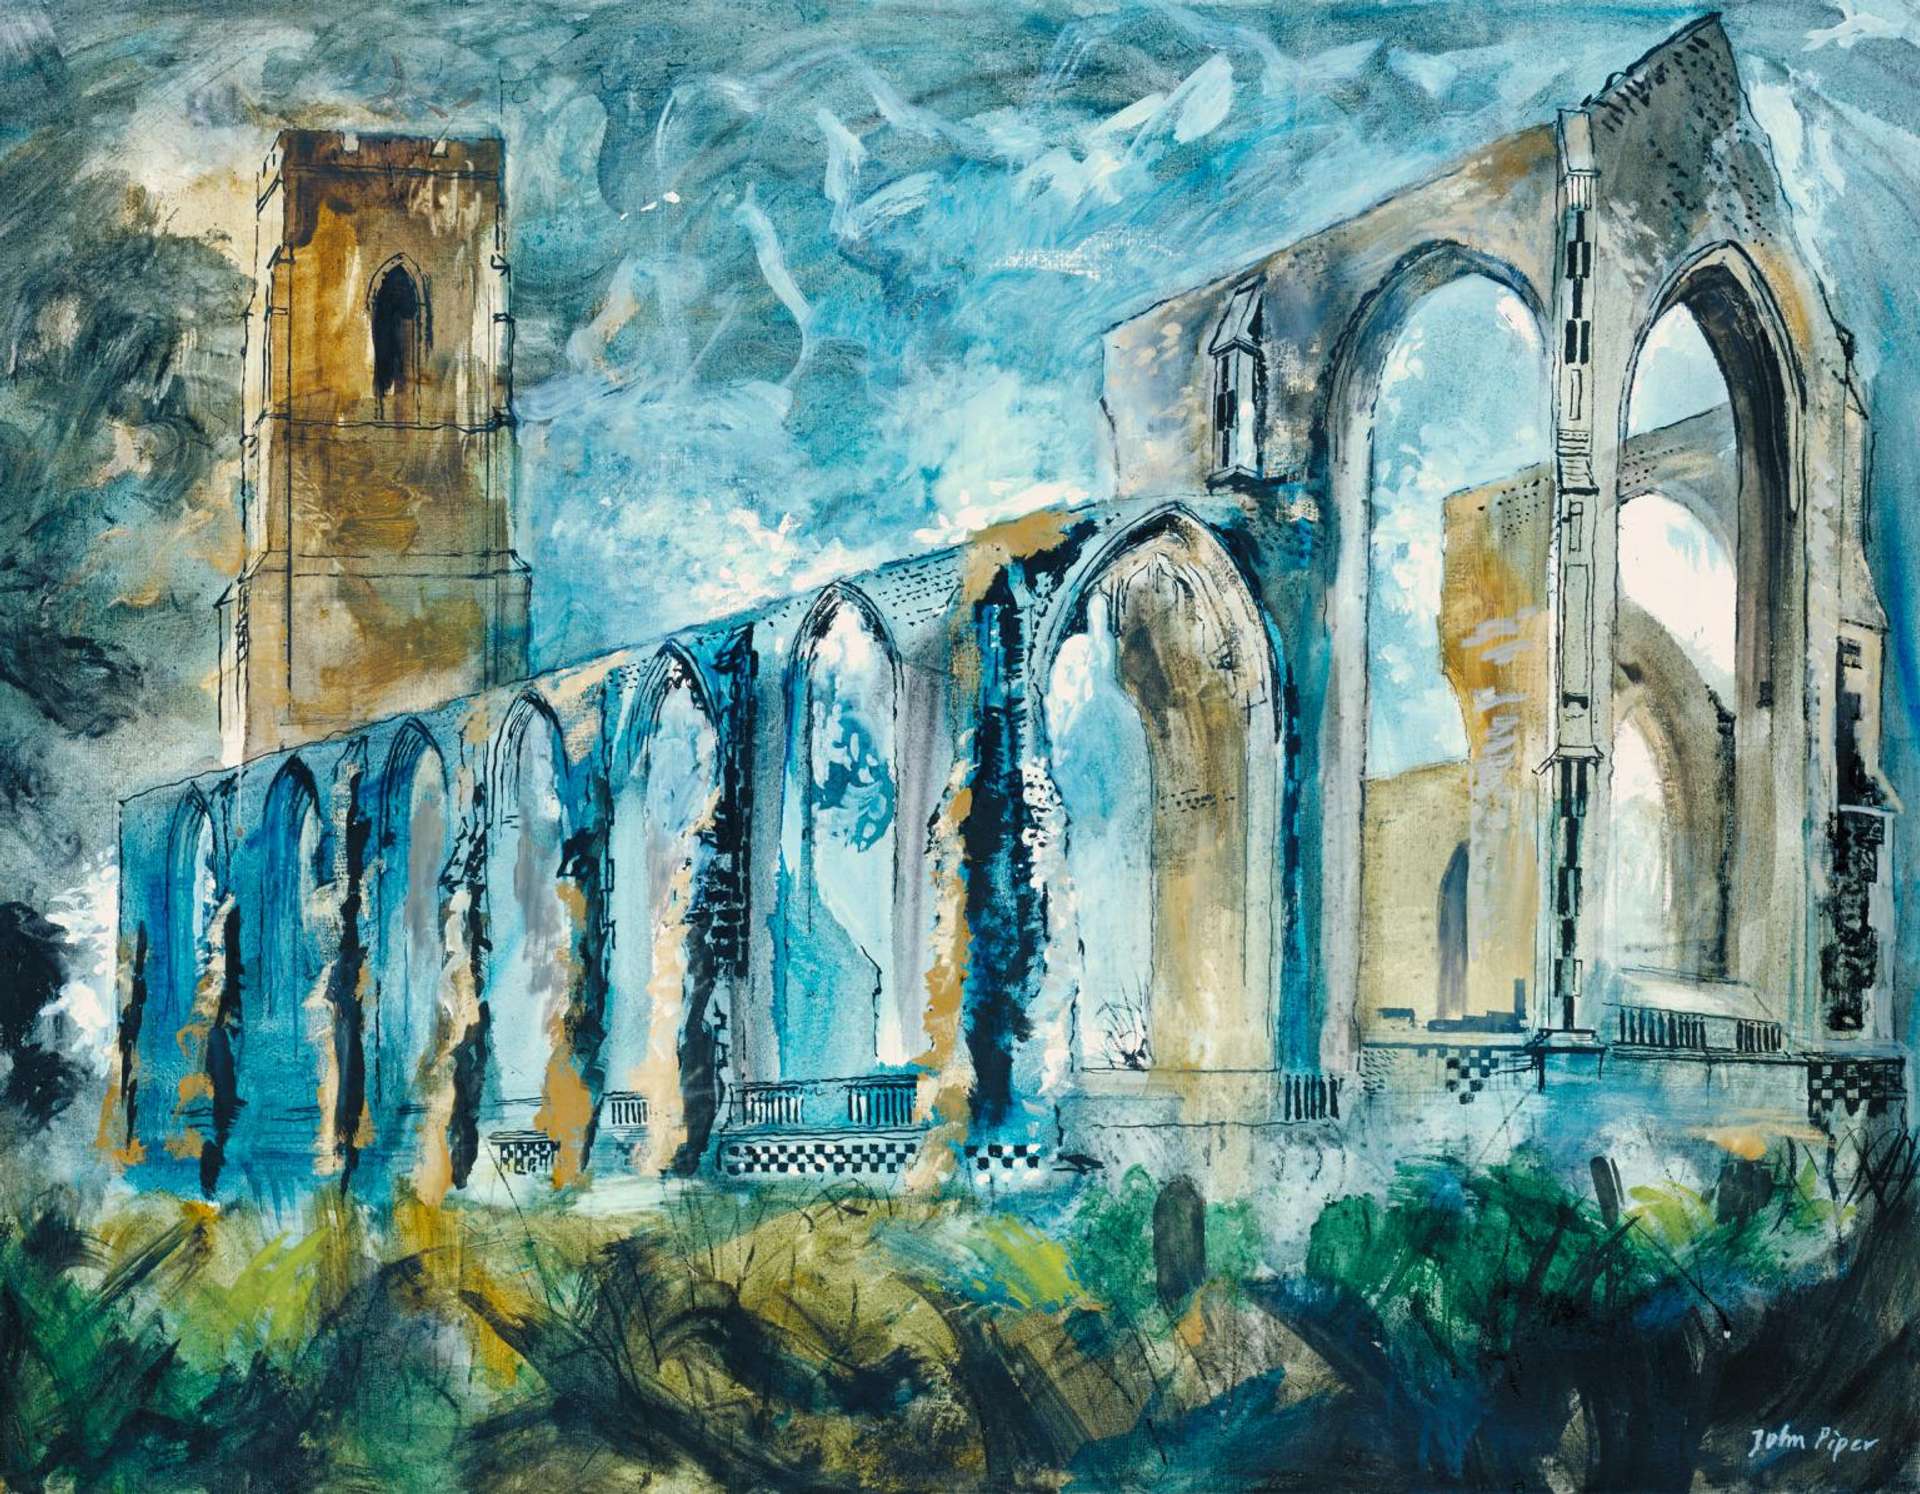 Painting of a 15th century church ruins in Suffolk, England. The artwork showcases the church's arches, a tall clock tower, and a serene sky. Rendered primarily in brown and gray shades, with hints of blue and green in the sky and surrounding fields.